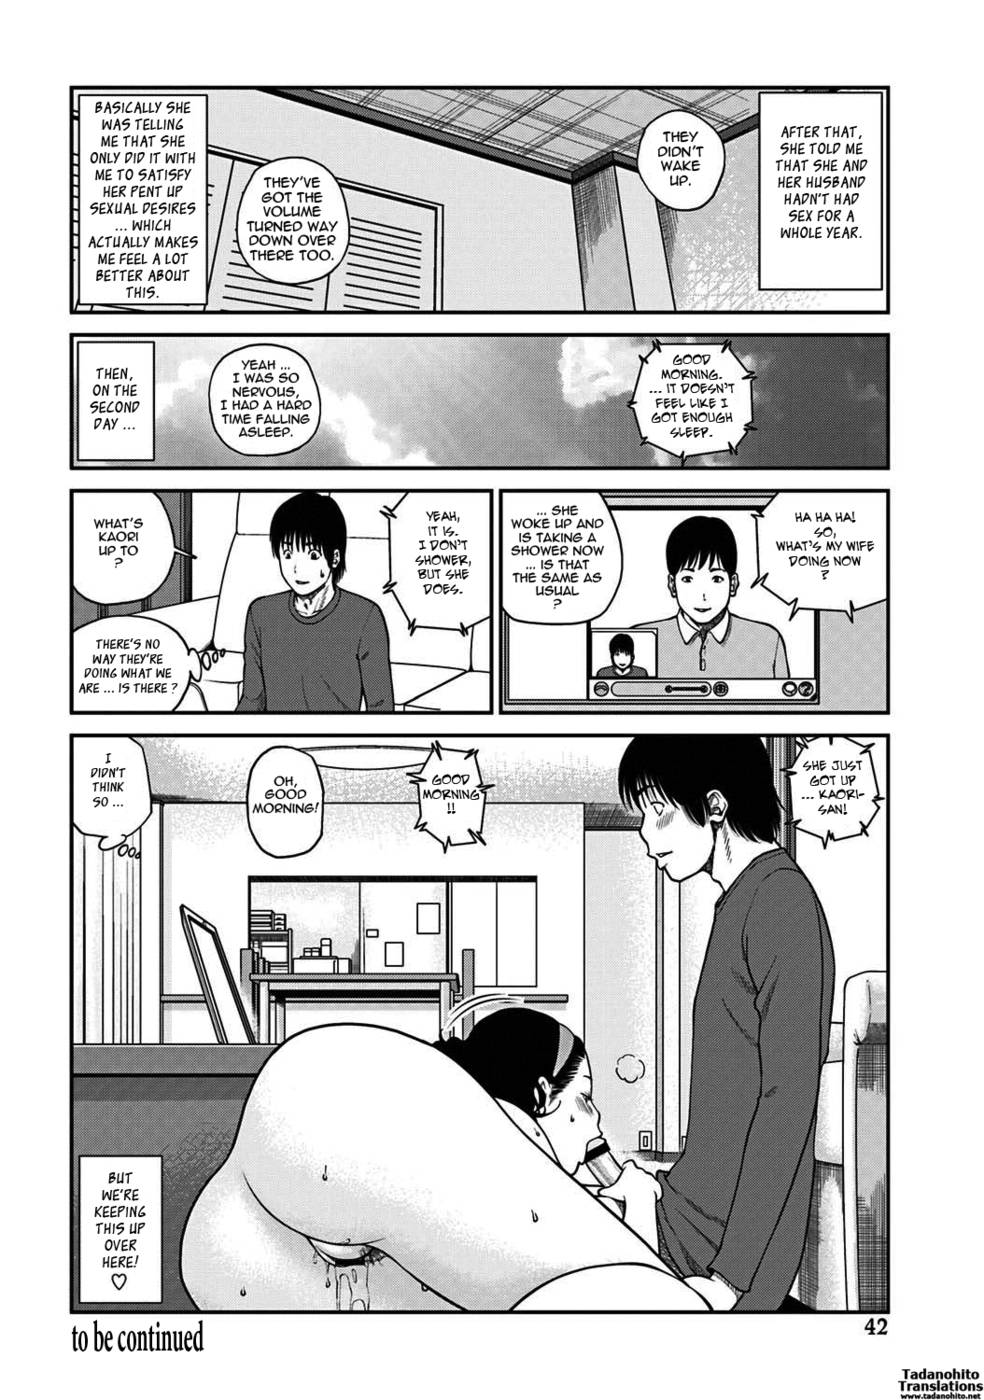 Hentai Manga Comic-33 Year Old Unsatisfied Wife-Chapter 2-Spouse Swapping-First Night-20